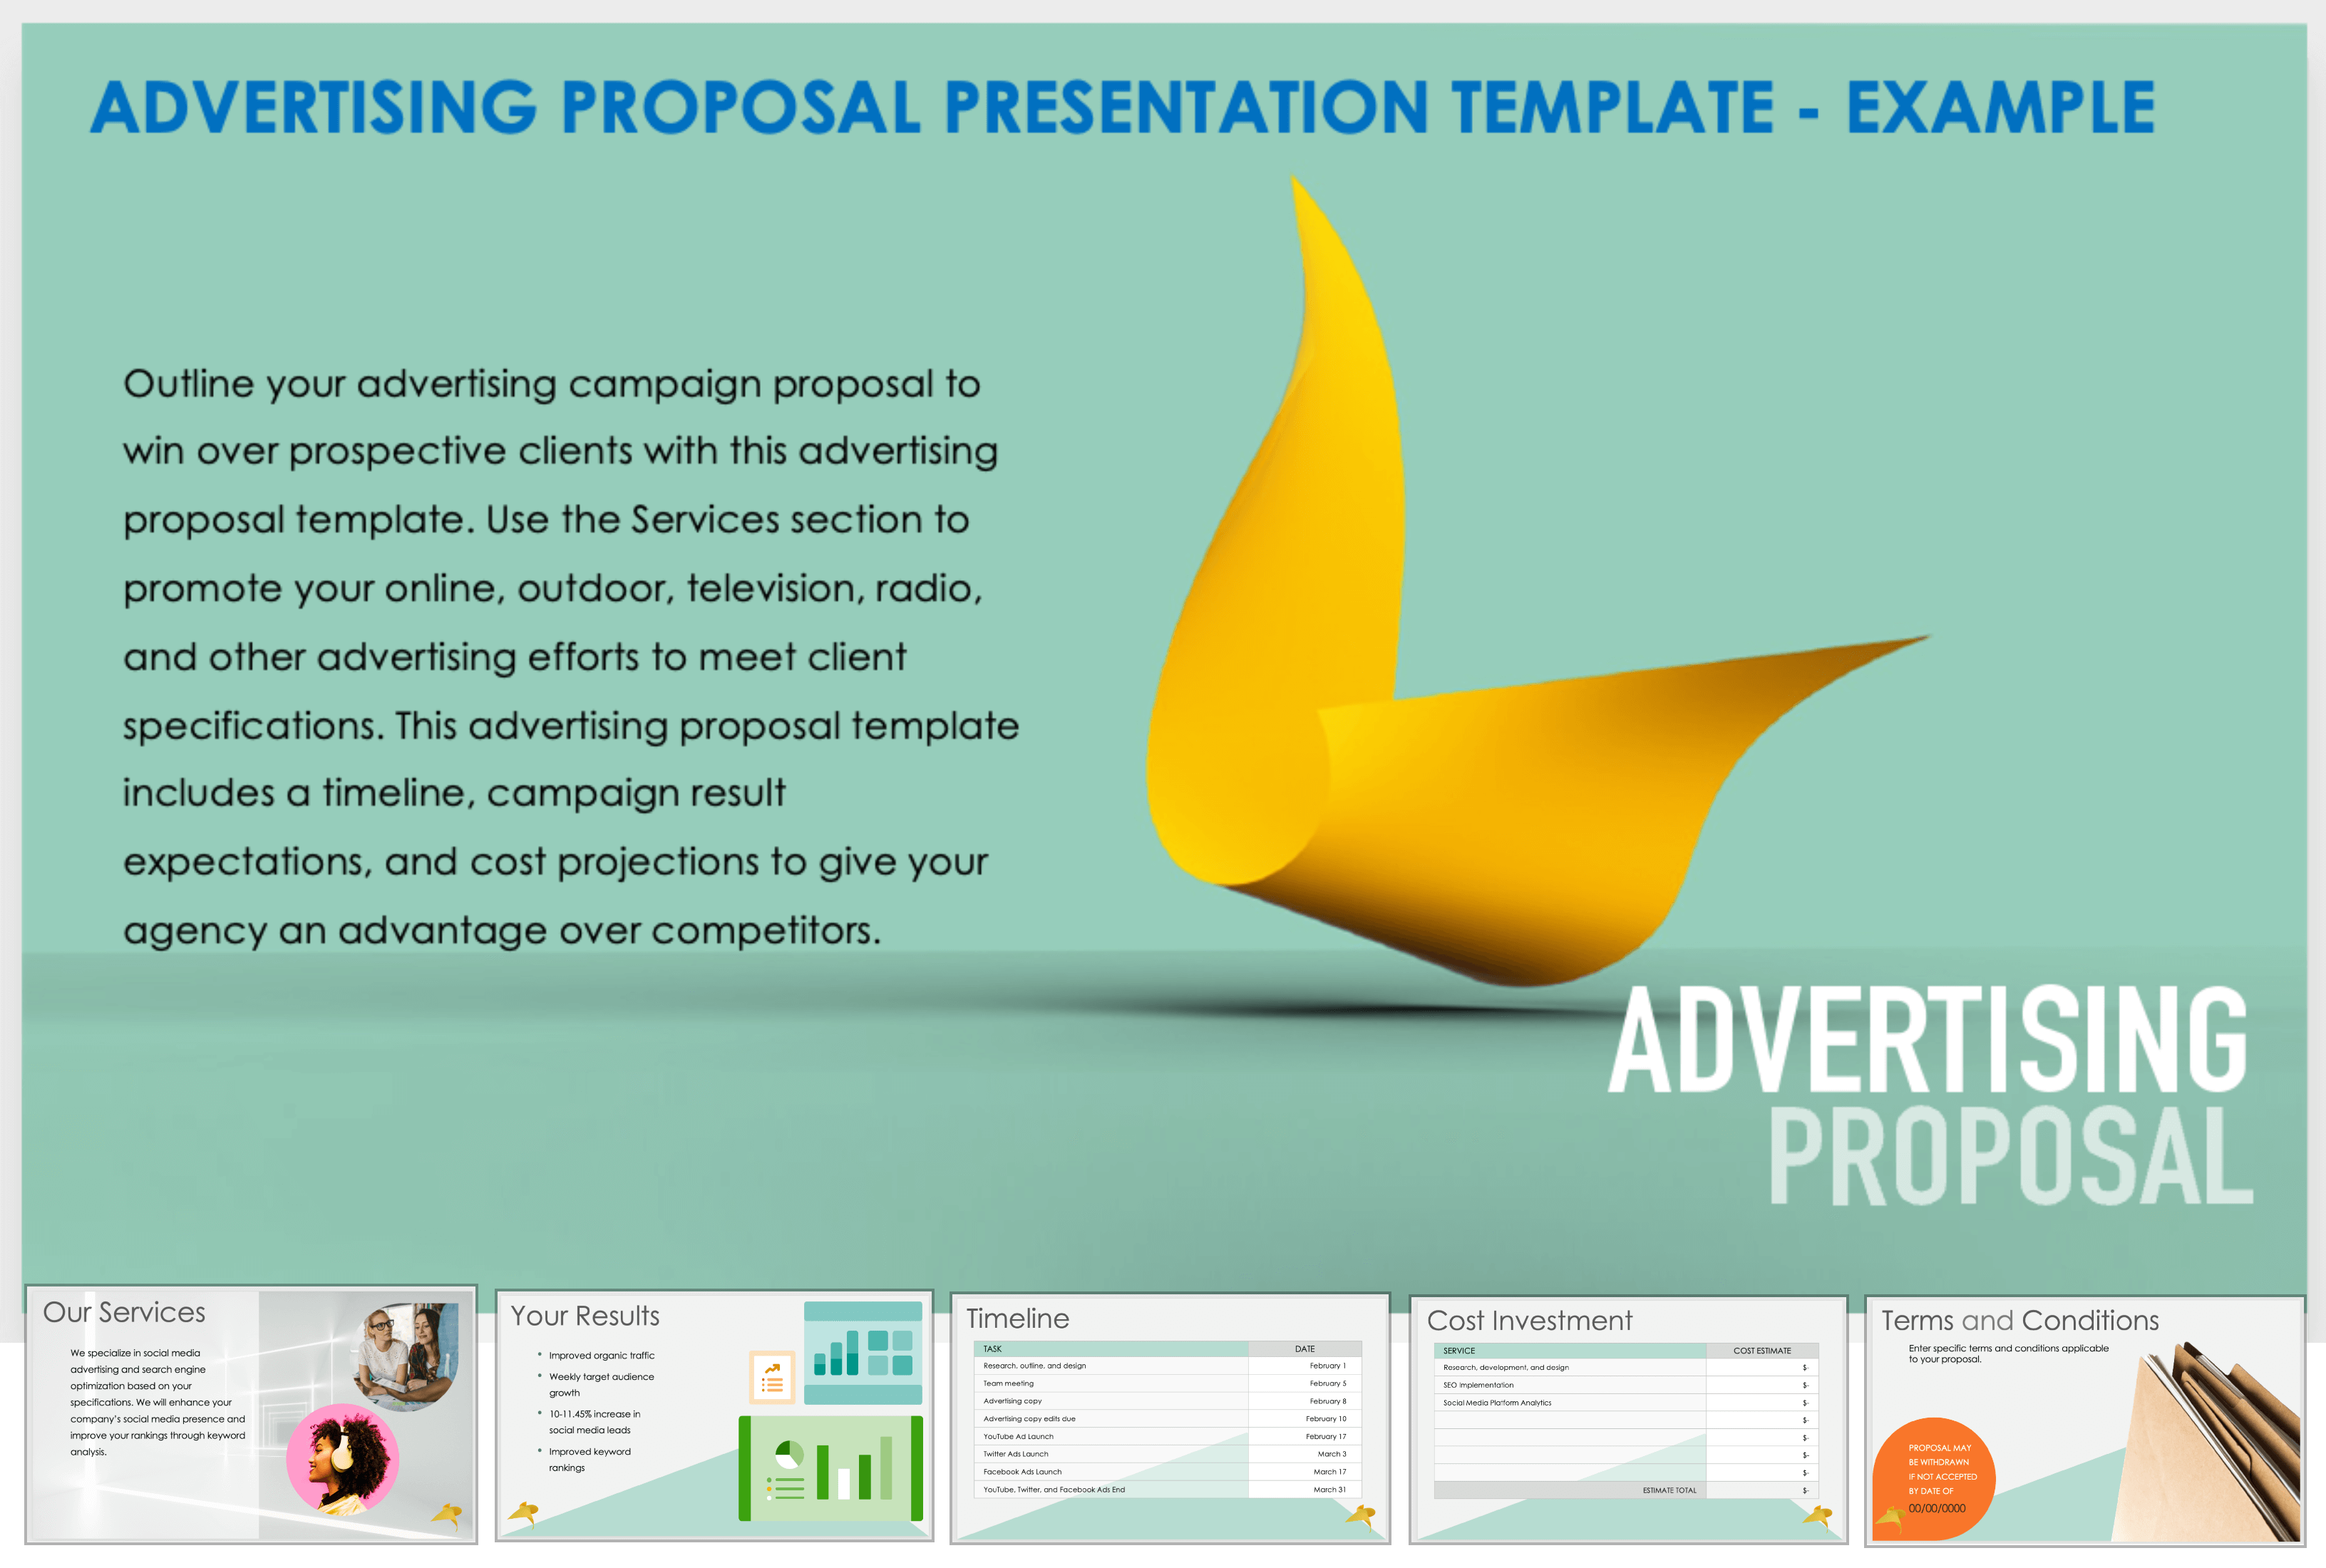 Advertising Proposal Presentation Template Example